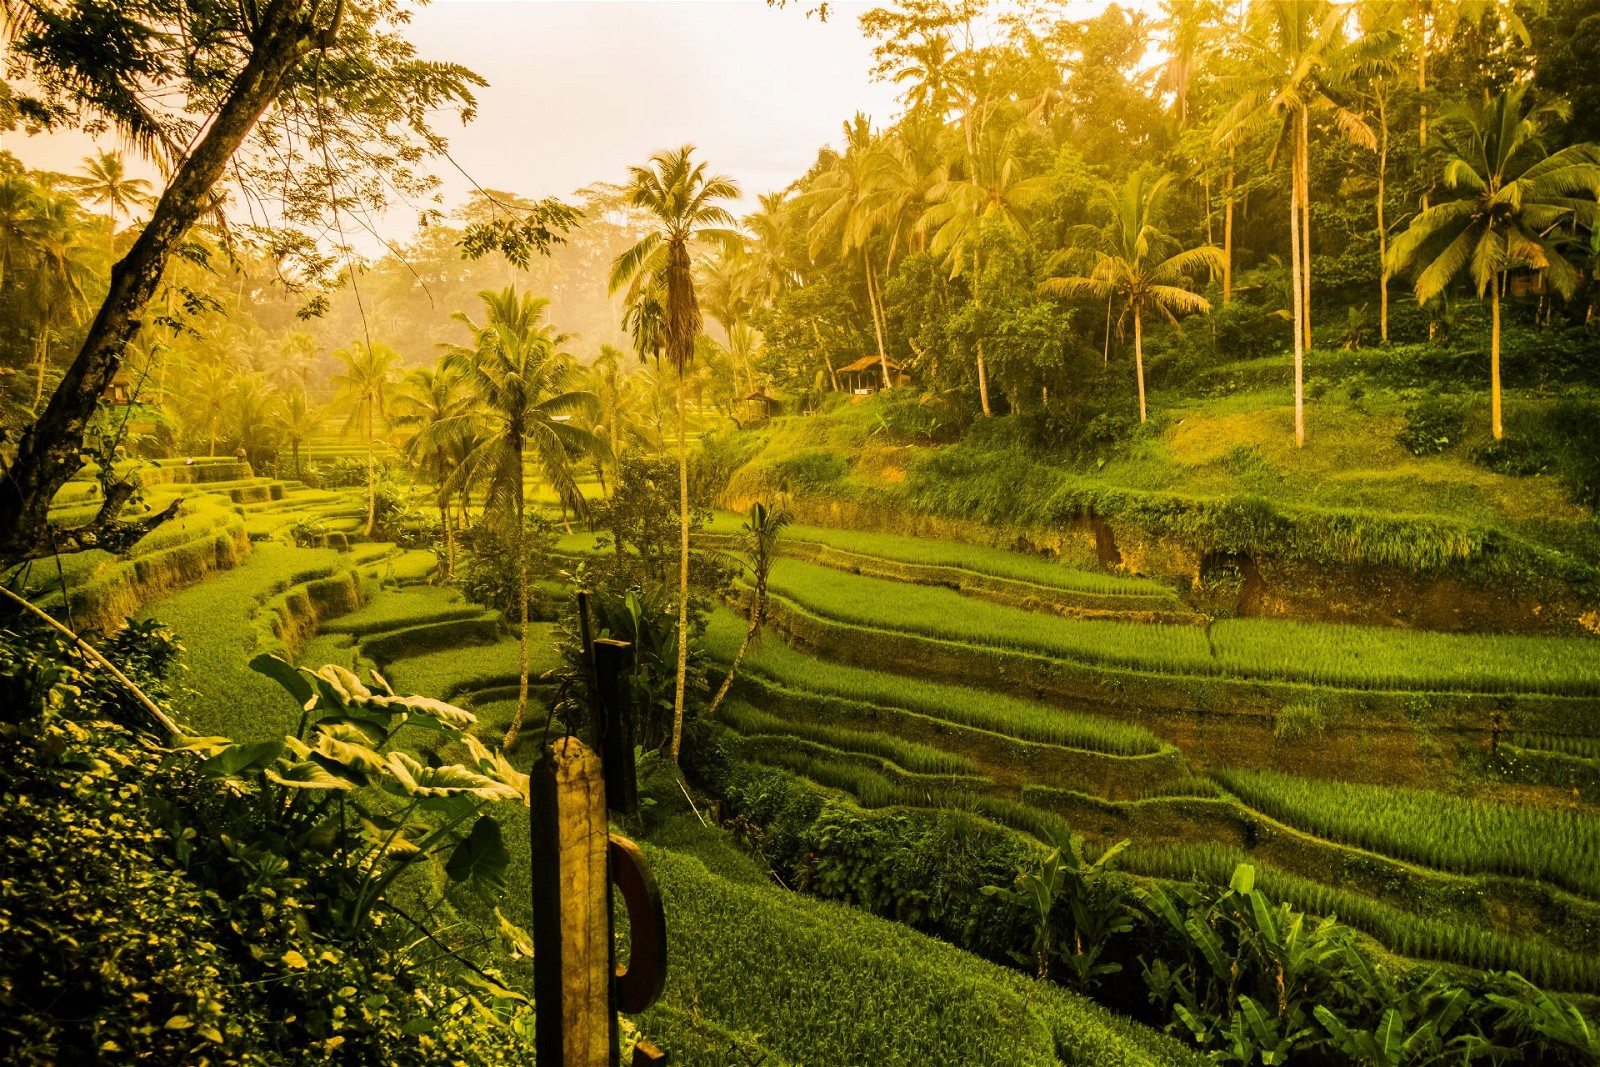 Located amidst lush rice paddies and tropical forests, Ubud is known as the cultural heart of Bali.